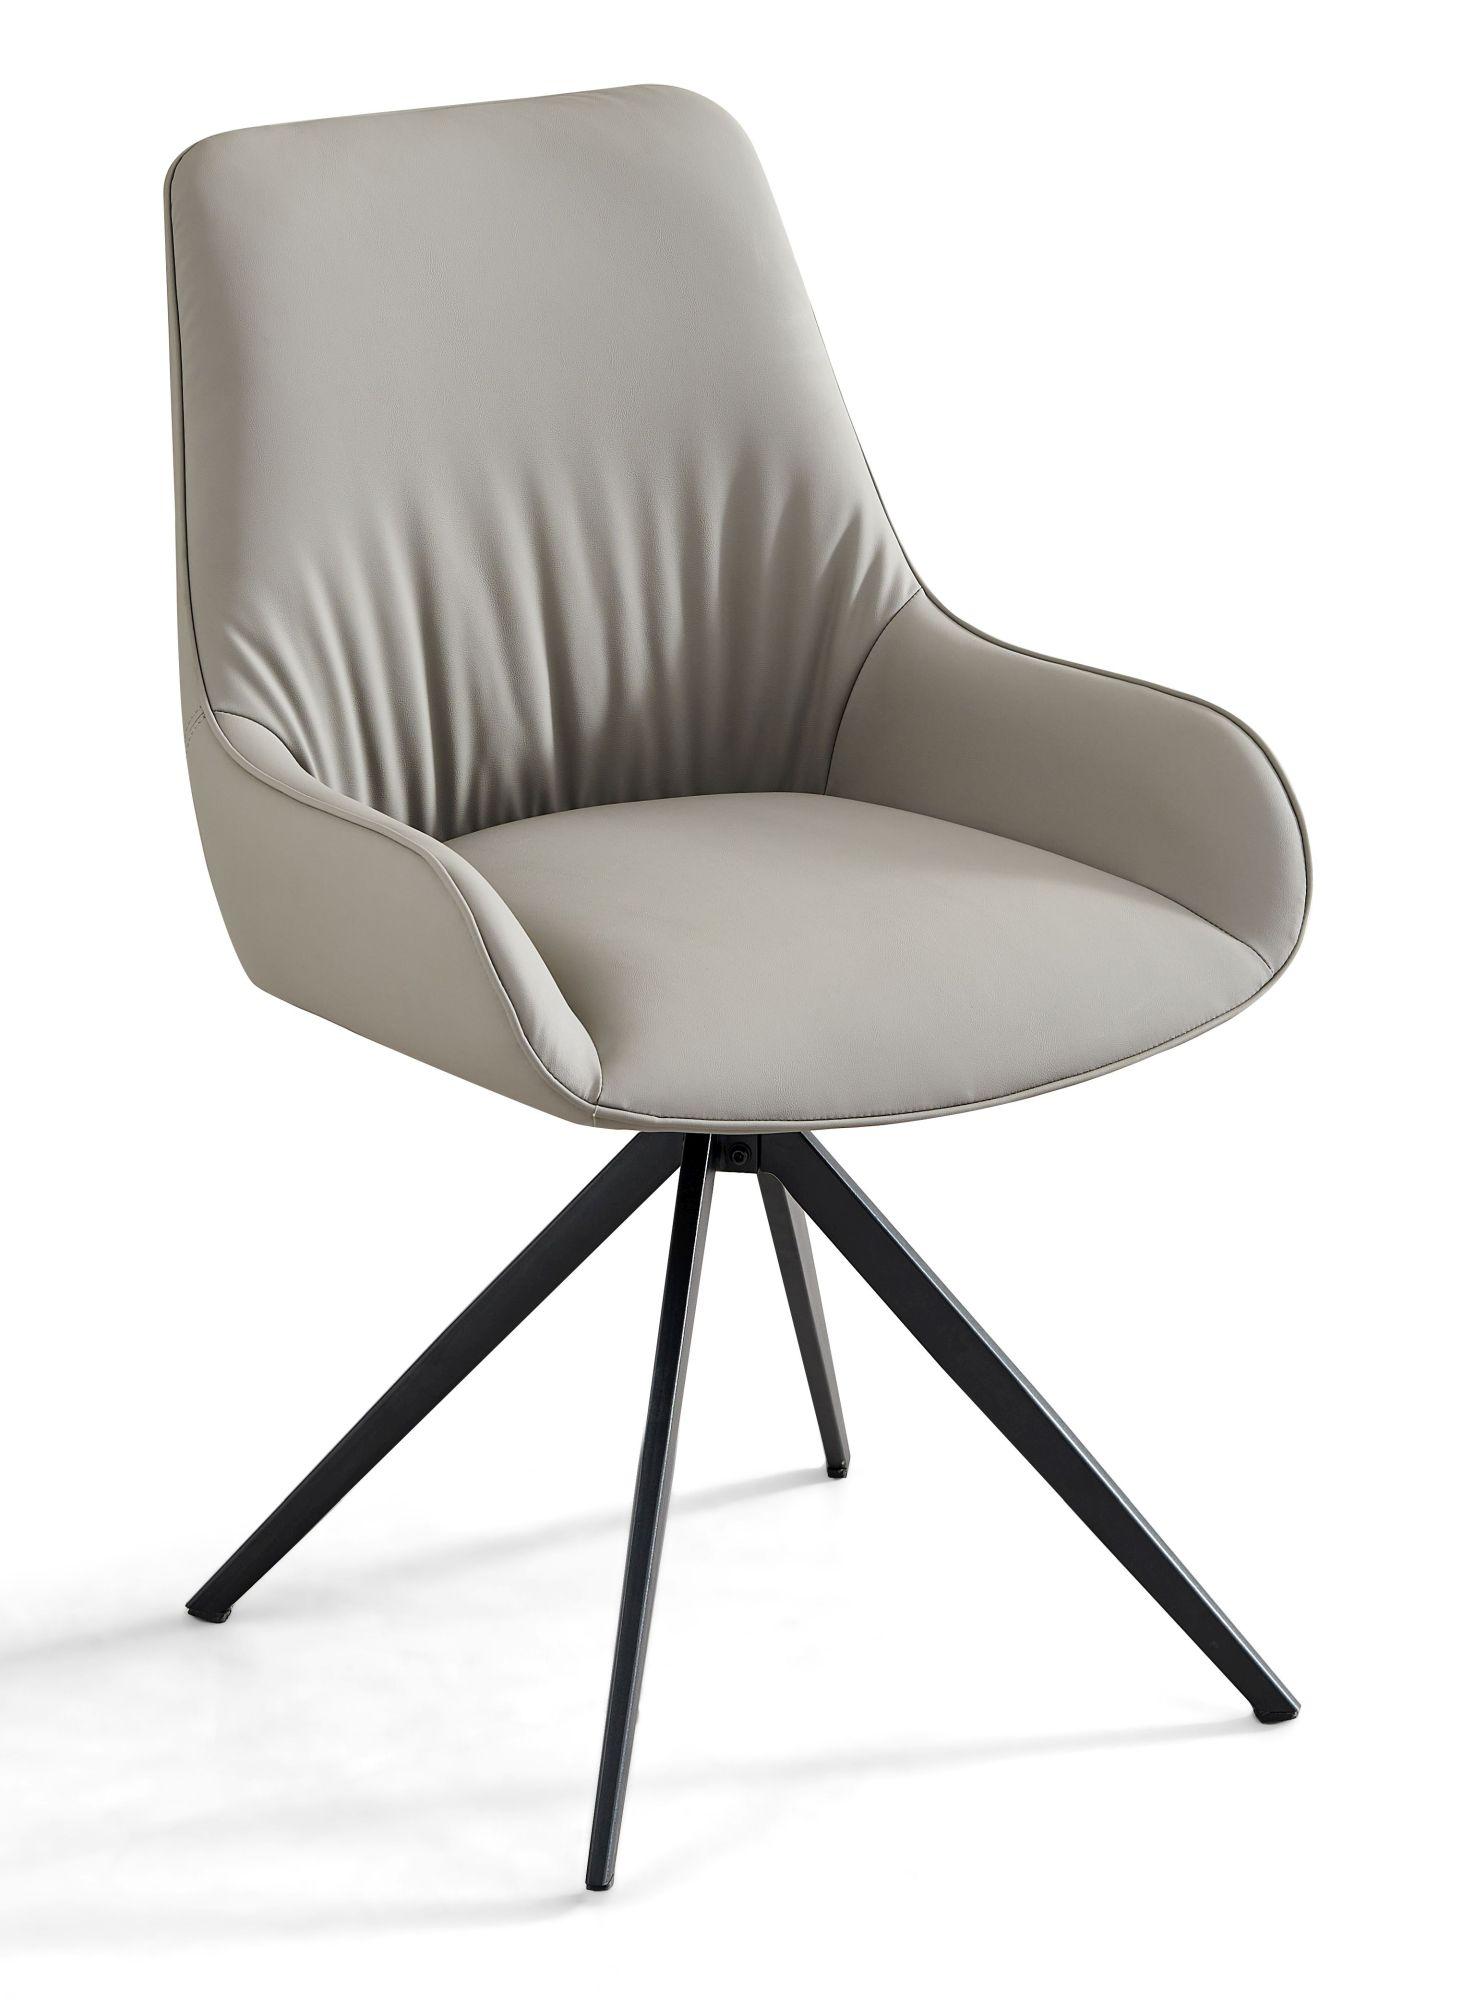 Monza Dark Grey Faux Leather Swivel Dining Chair with Black Legs